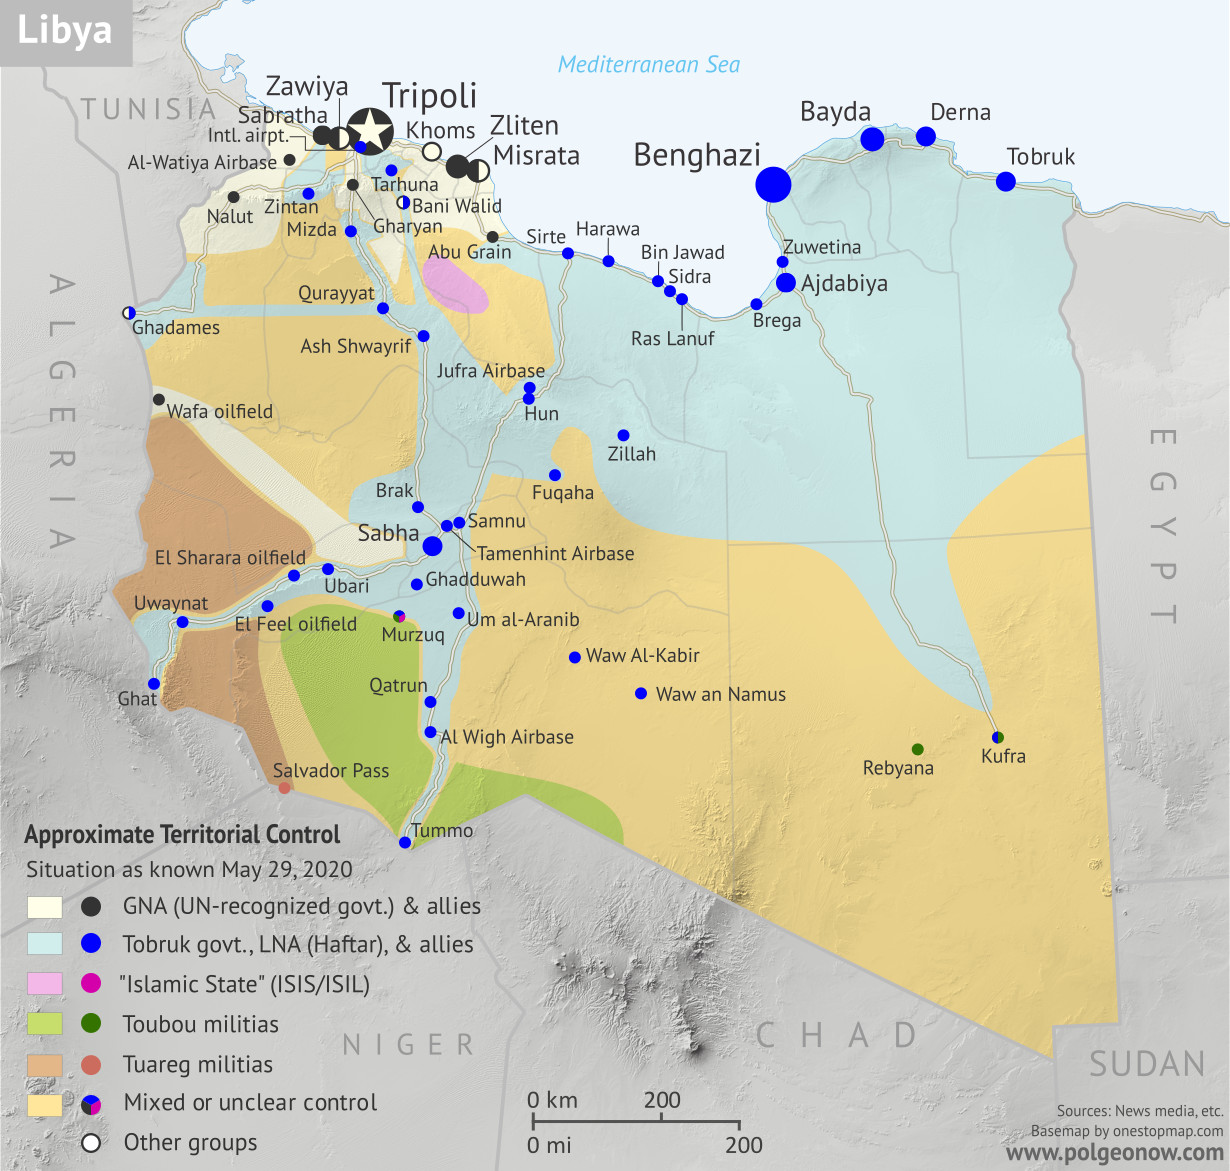 Libya: Who controls what? A concise, professional map of who controls Libya now (May 2020). Shows detailed territorial control in the Libyan Civil War as of May 29, 2020, including all major parties (Government of National Accord (GNA); Tobruk House of Representatives, General Haftar's Libyan National Army (LNA), and allies; Tuareg and Toubou (Tebu, Tubu) militias in the south; and the so-called Islamic State (ISIS/ISIL)). Includes terrain, major roads, and recent locations of interest including Al-Watiyah Airbase, Tarhuna, Mizda, and more. Colorblind accessible.